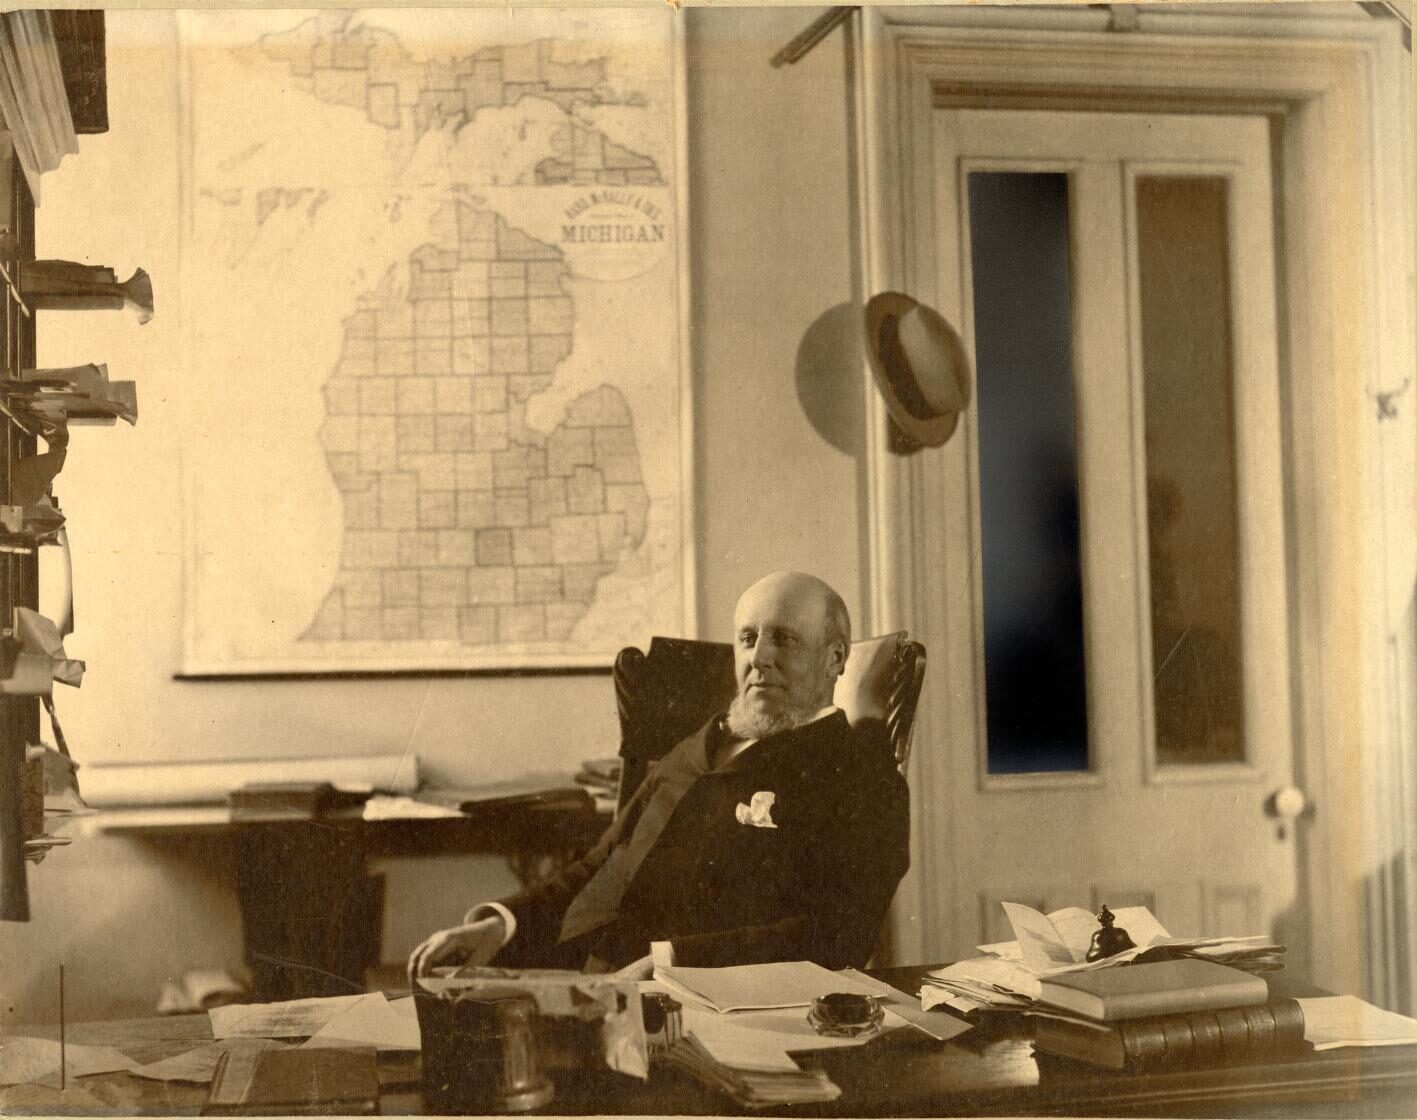 James B. Angell at his desk in the "President